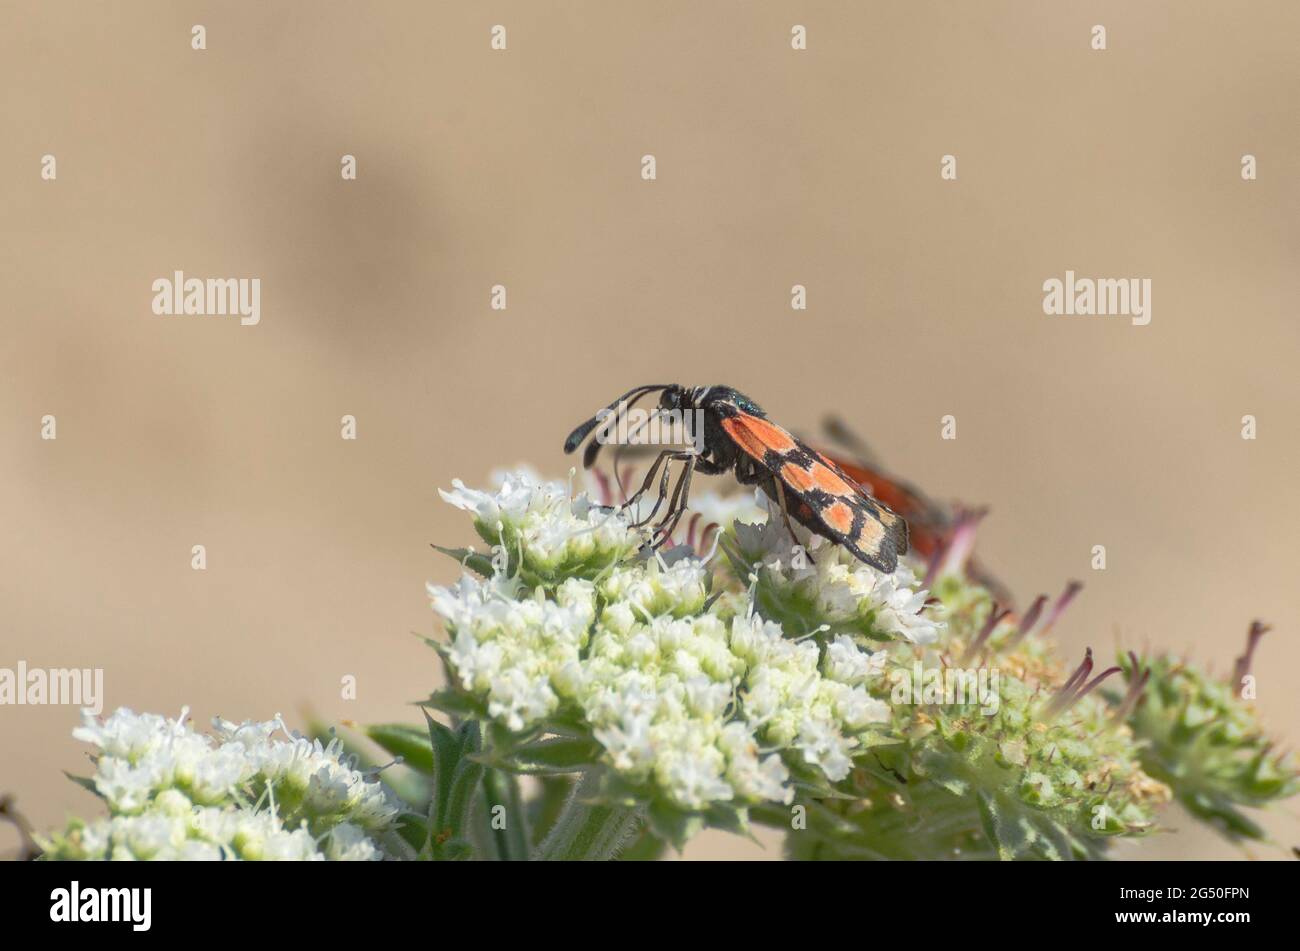 Specimen of butterfly Zygaena Filipendulae in the foreground above a flower Stock Photo